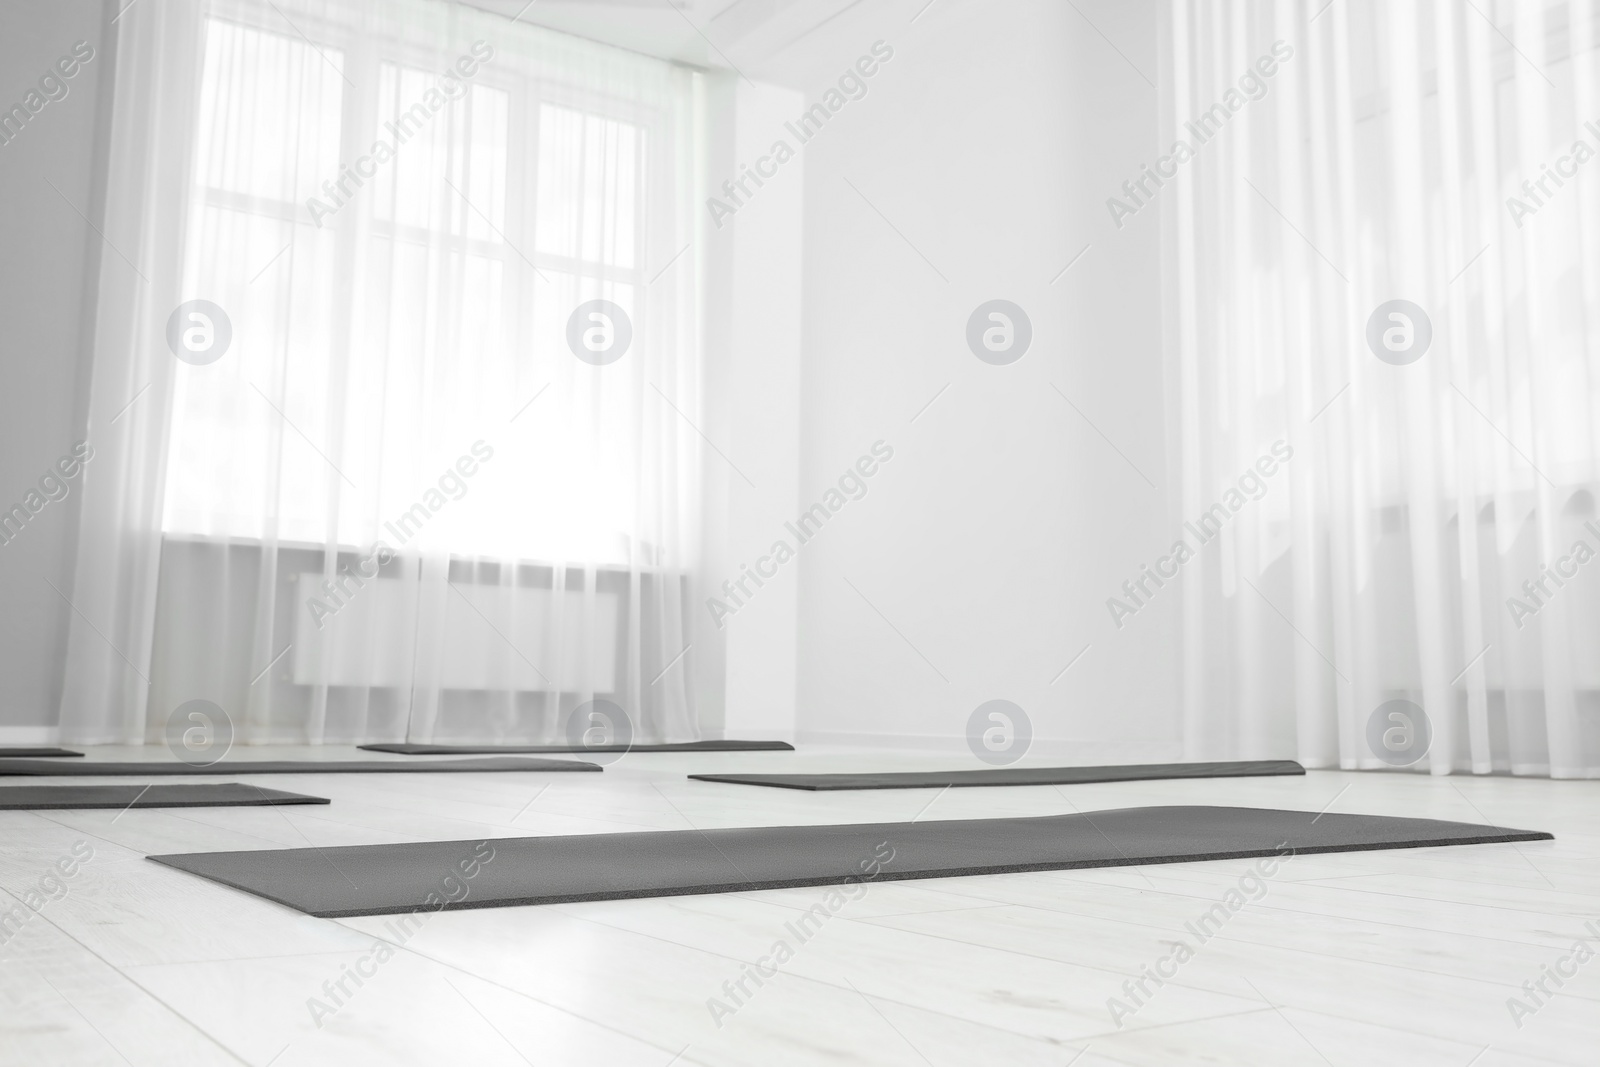 Photo of Spacious yoga studio with exercise mats, low angle view